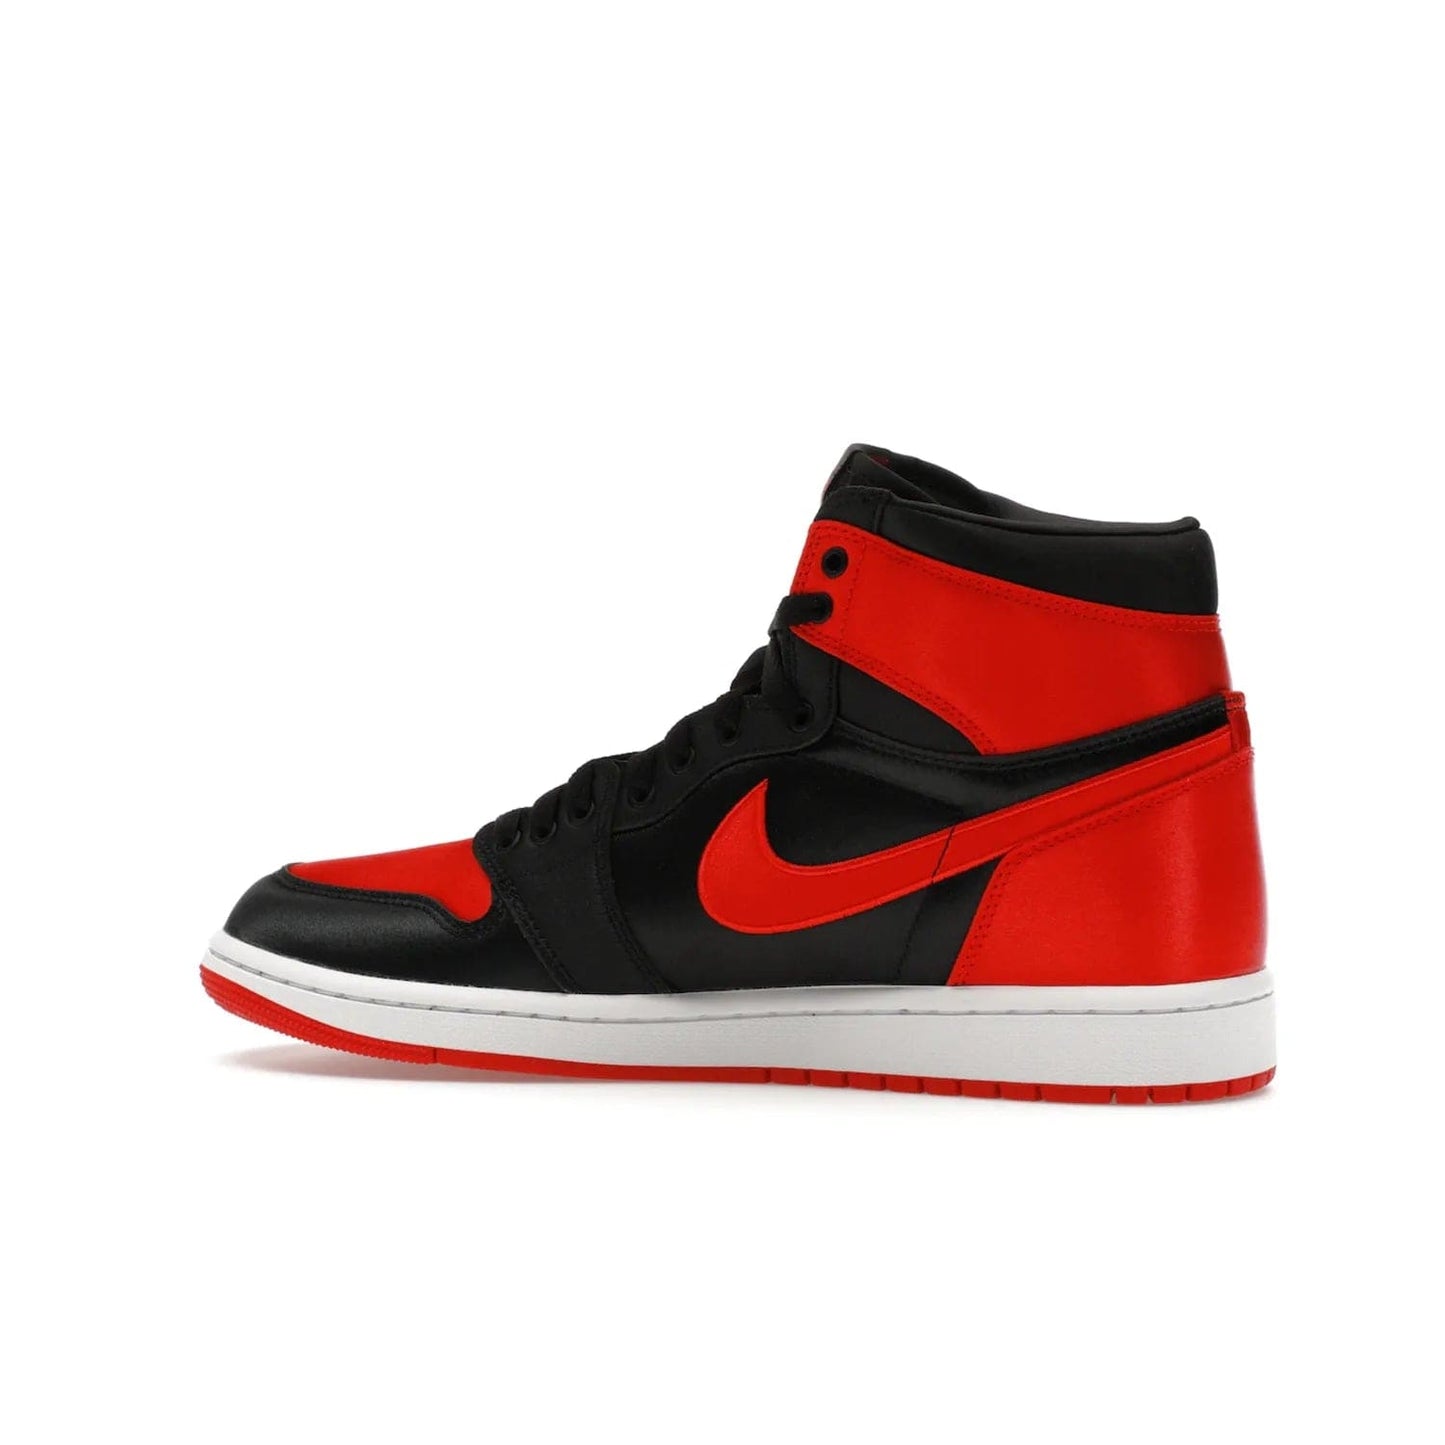 Jordan 1 Retro High OG Satin Bred (Women's) - Image 21 - Only at www.BallersClubKickz.com - Introducing the Jordan 1 Retro High OG Satin Bred (Women's). Luxe satin finish, contrasting hues & classic accents. Trending sneakers symbolizing timelessness & heritage. Make a bold statement with this iconic shoe. Available October 4, 2023.